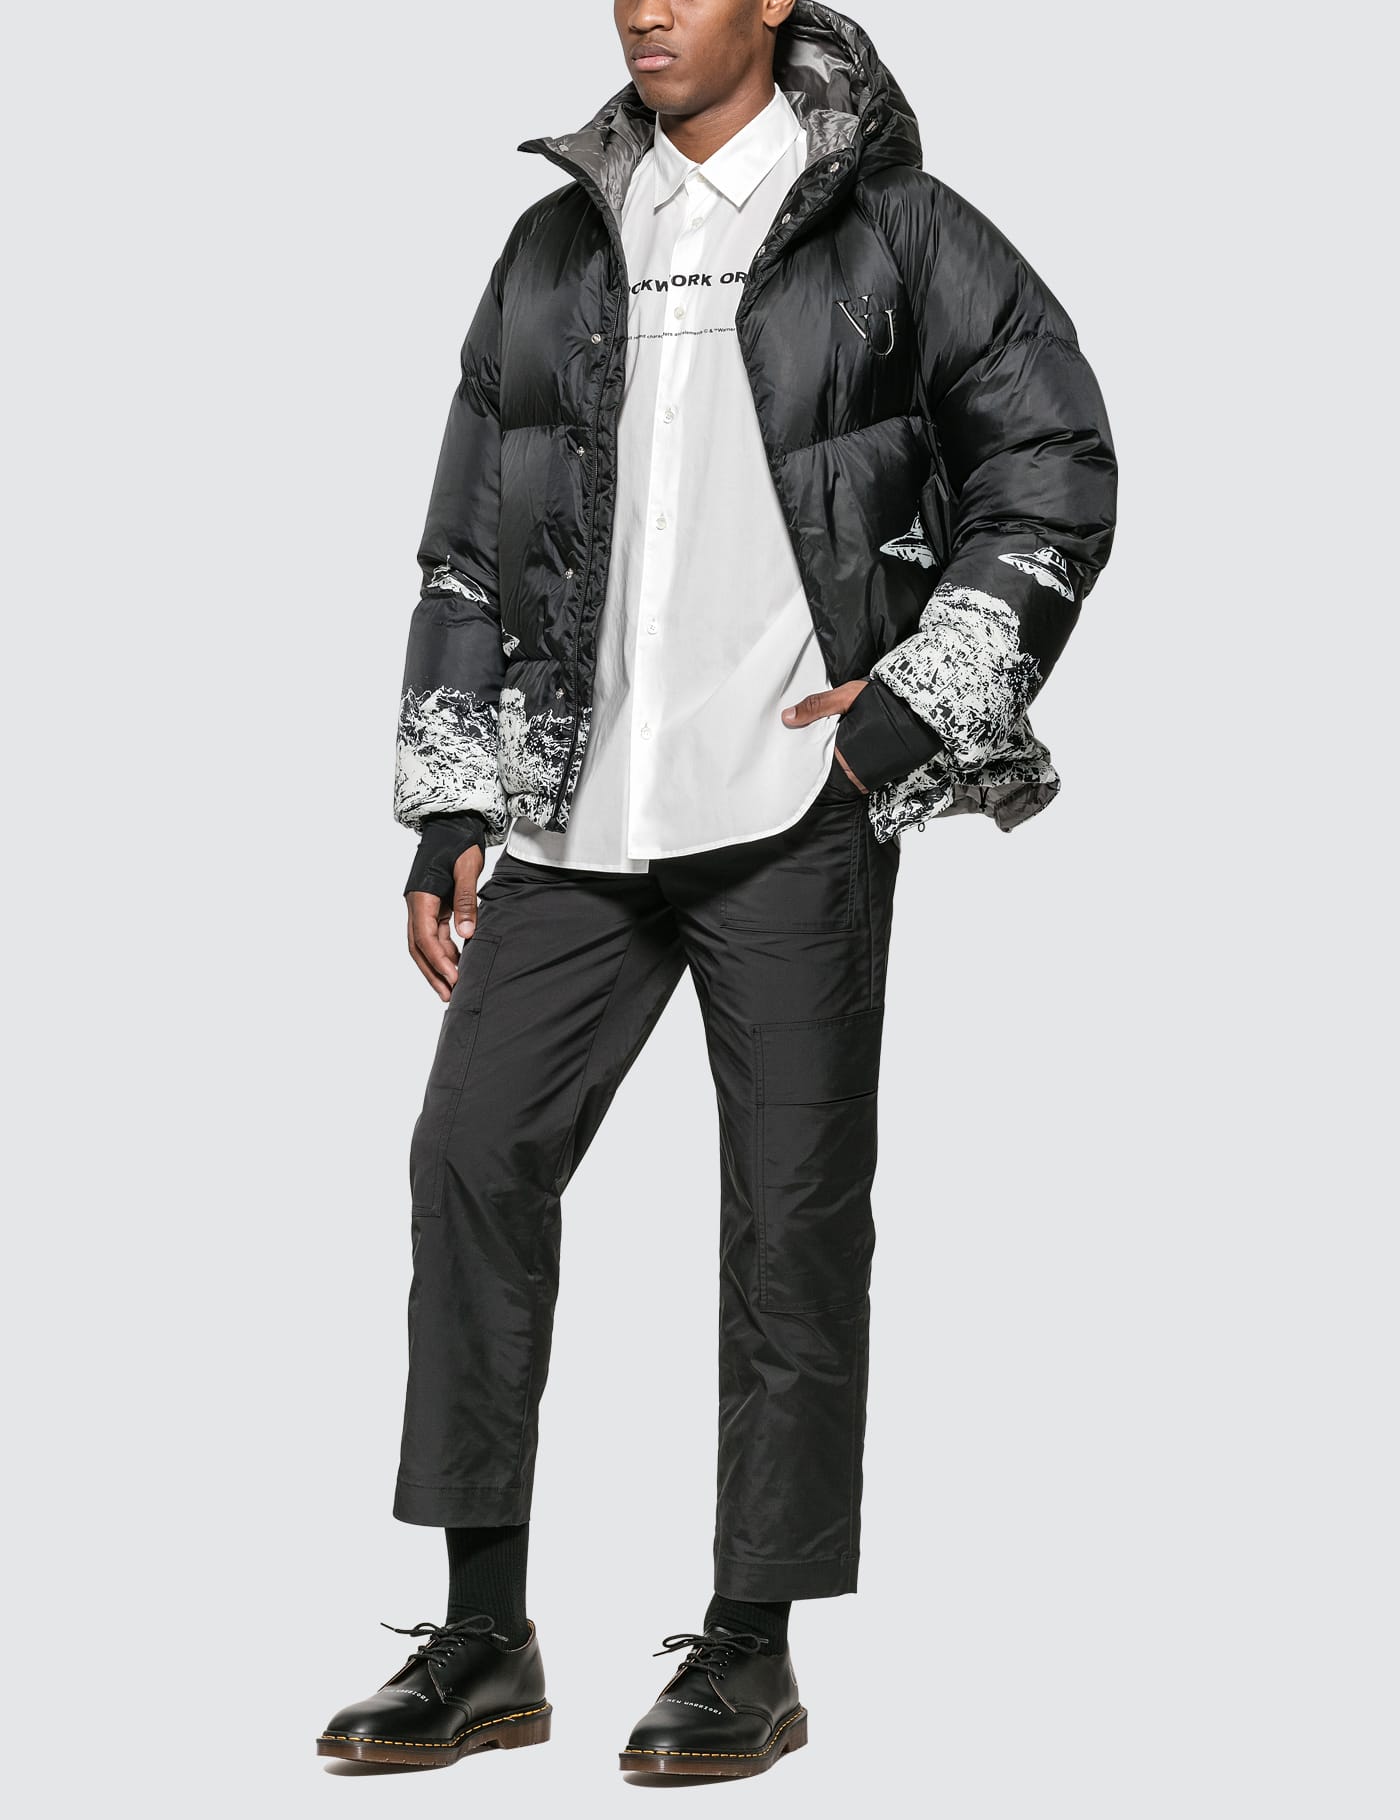 Undercover - Undercover x Valentino Down Jacket | HBX - Globally